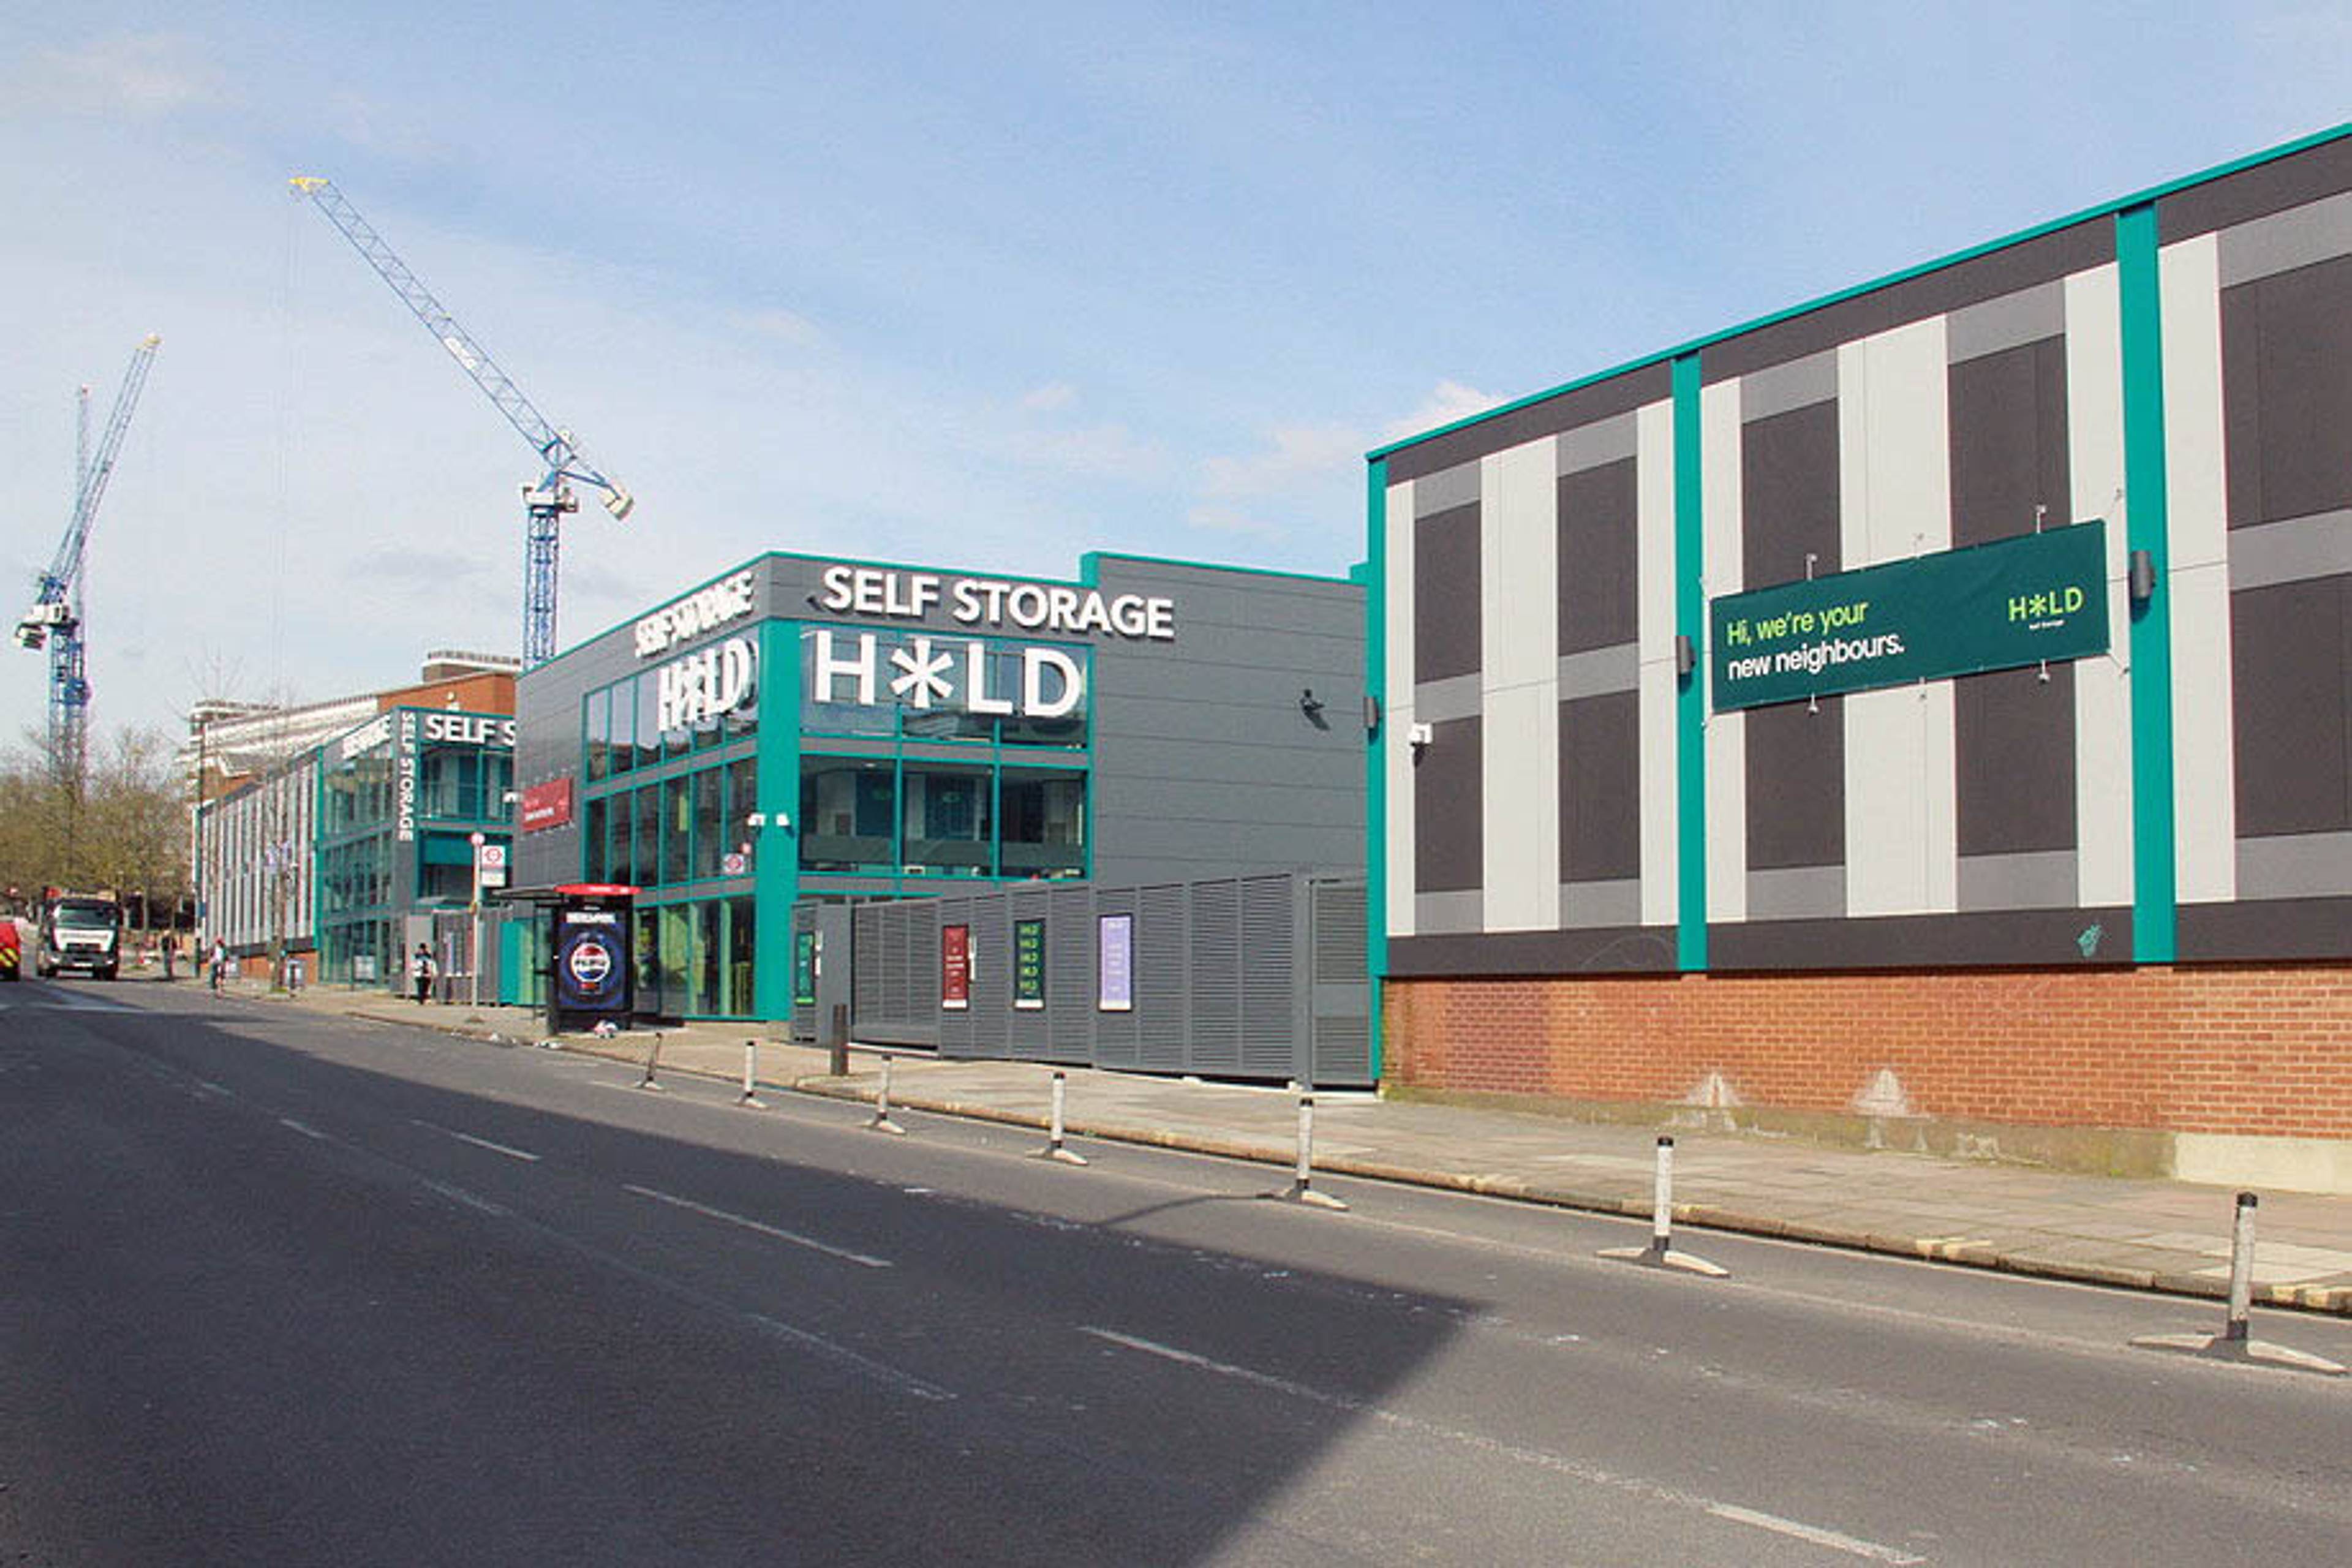 HOLD large self storage facility in London